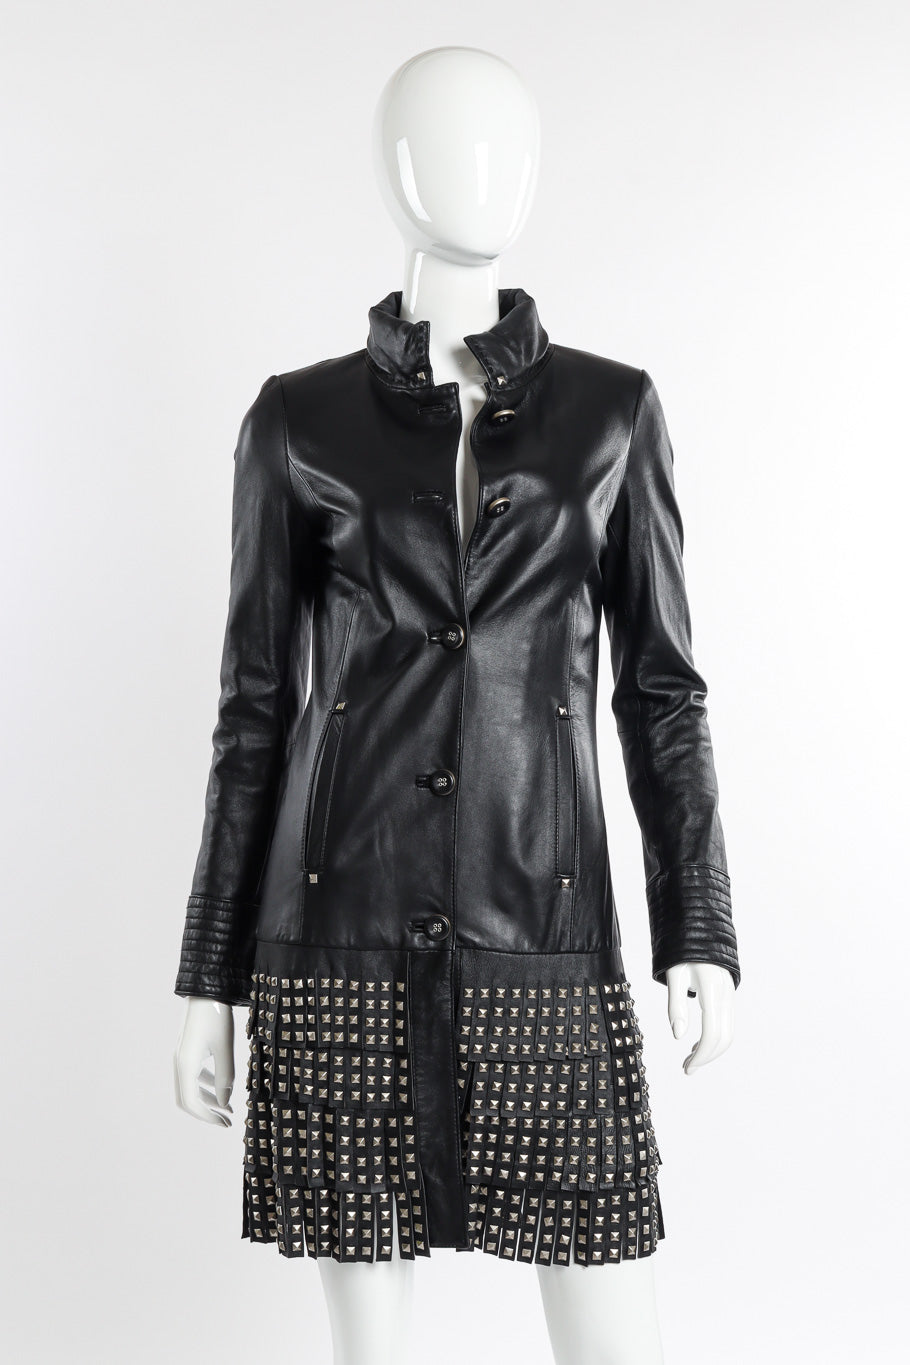 Class Roberto Cavalli Studded Leather Trench Coat front view on mannequin closeup @recessla